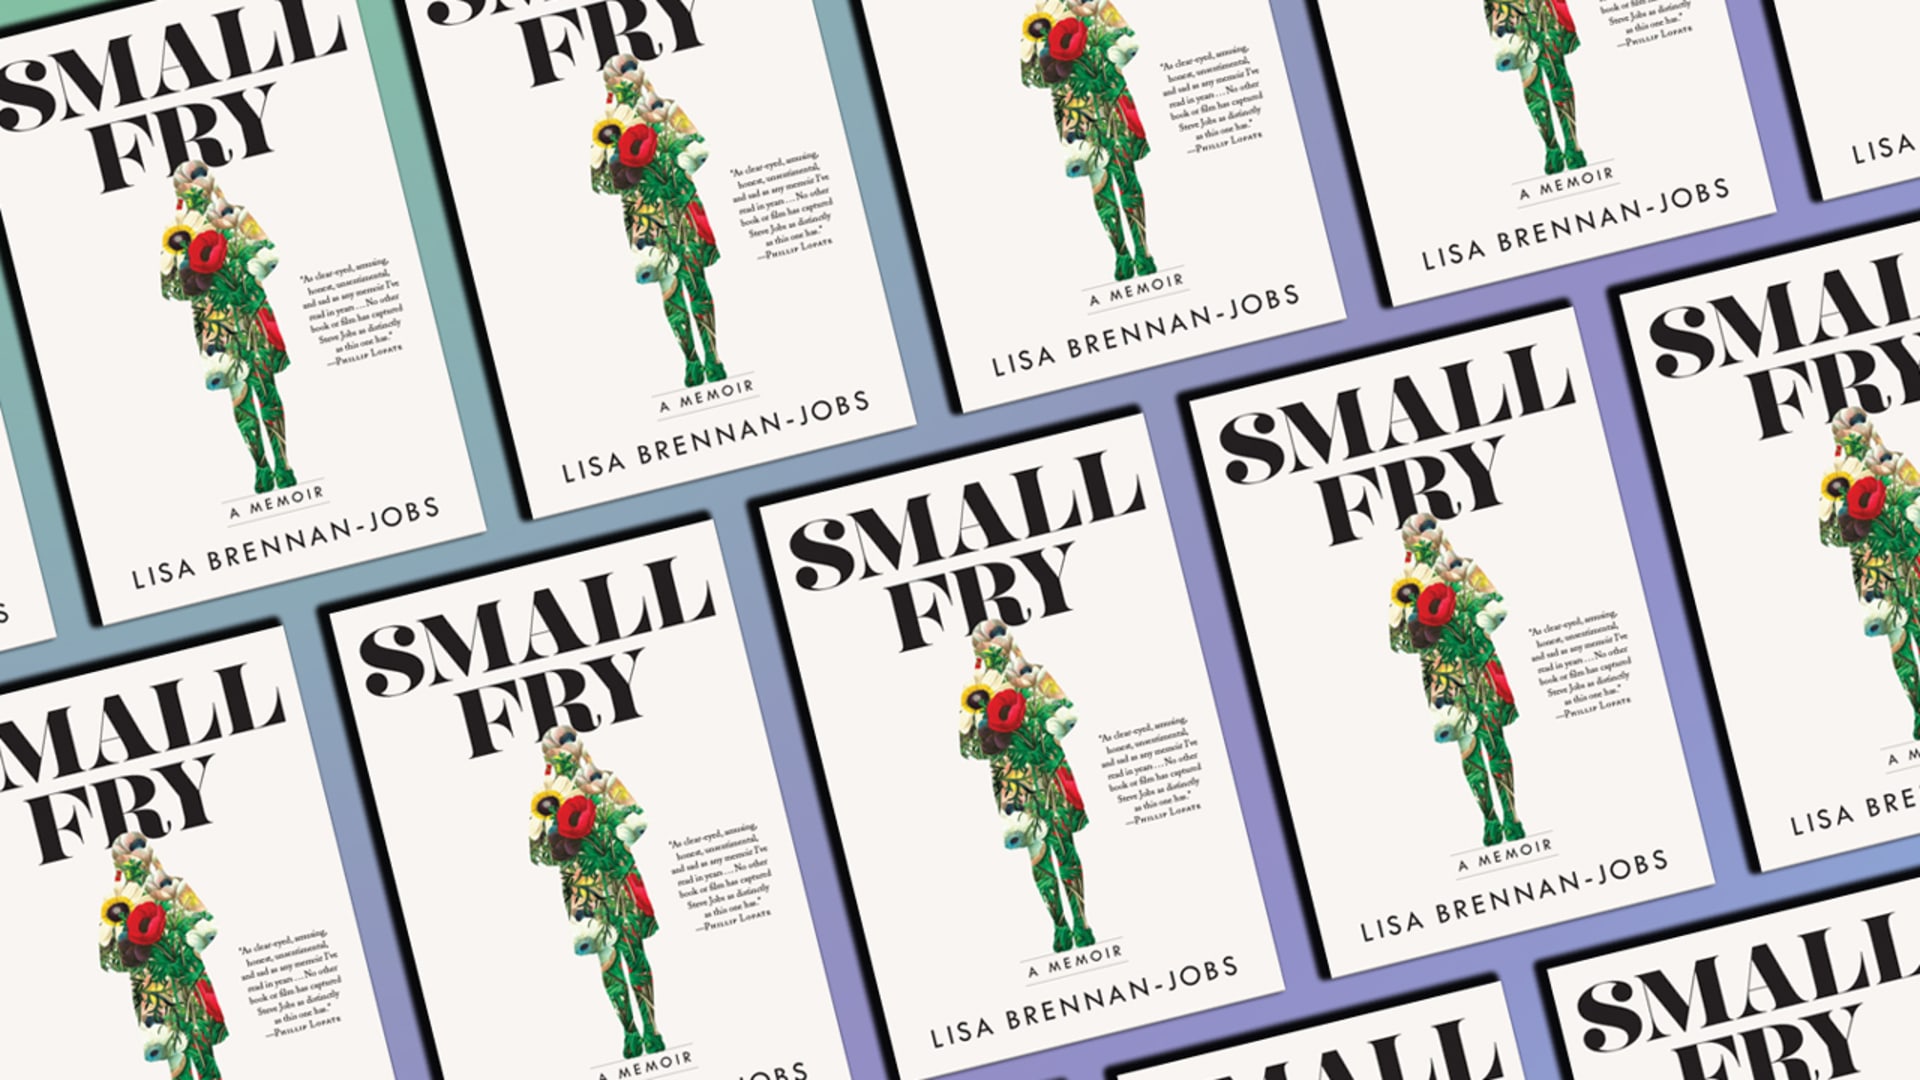 Lisa Brennan-Jobs: 7 revealing tidbits from her new book “Small Fry”